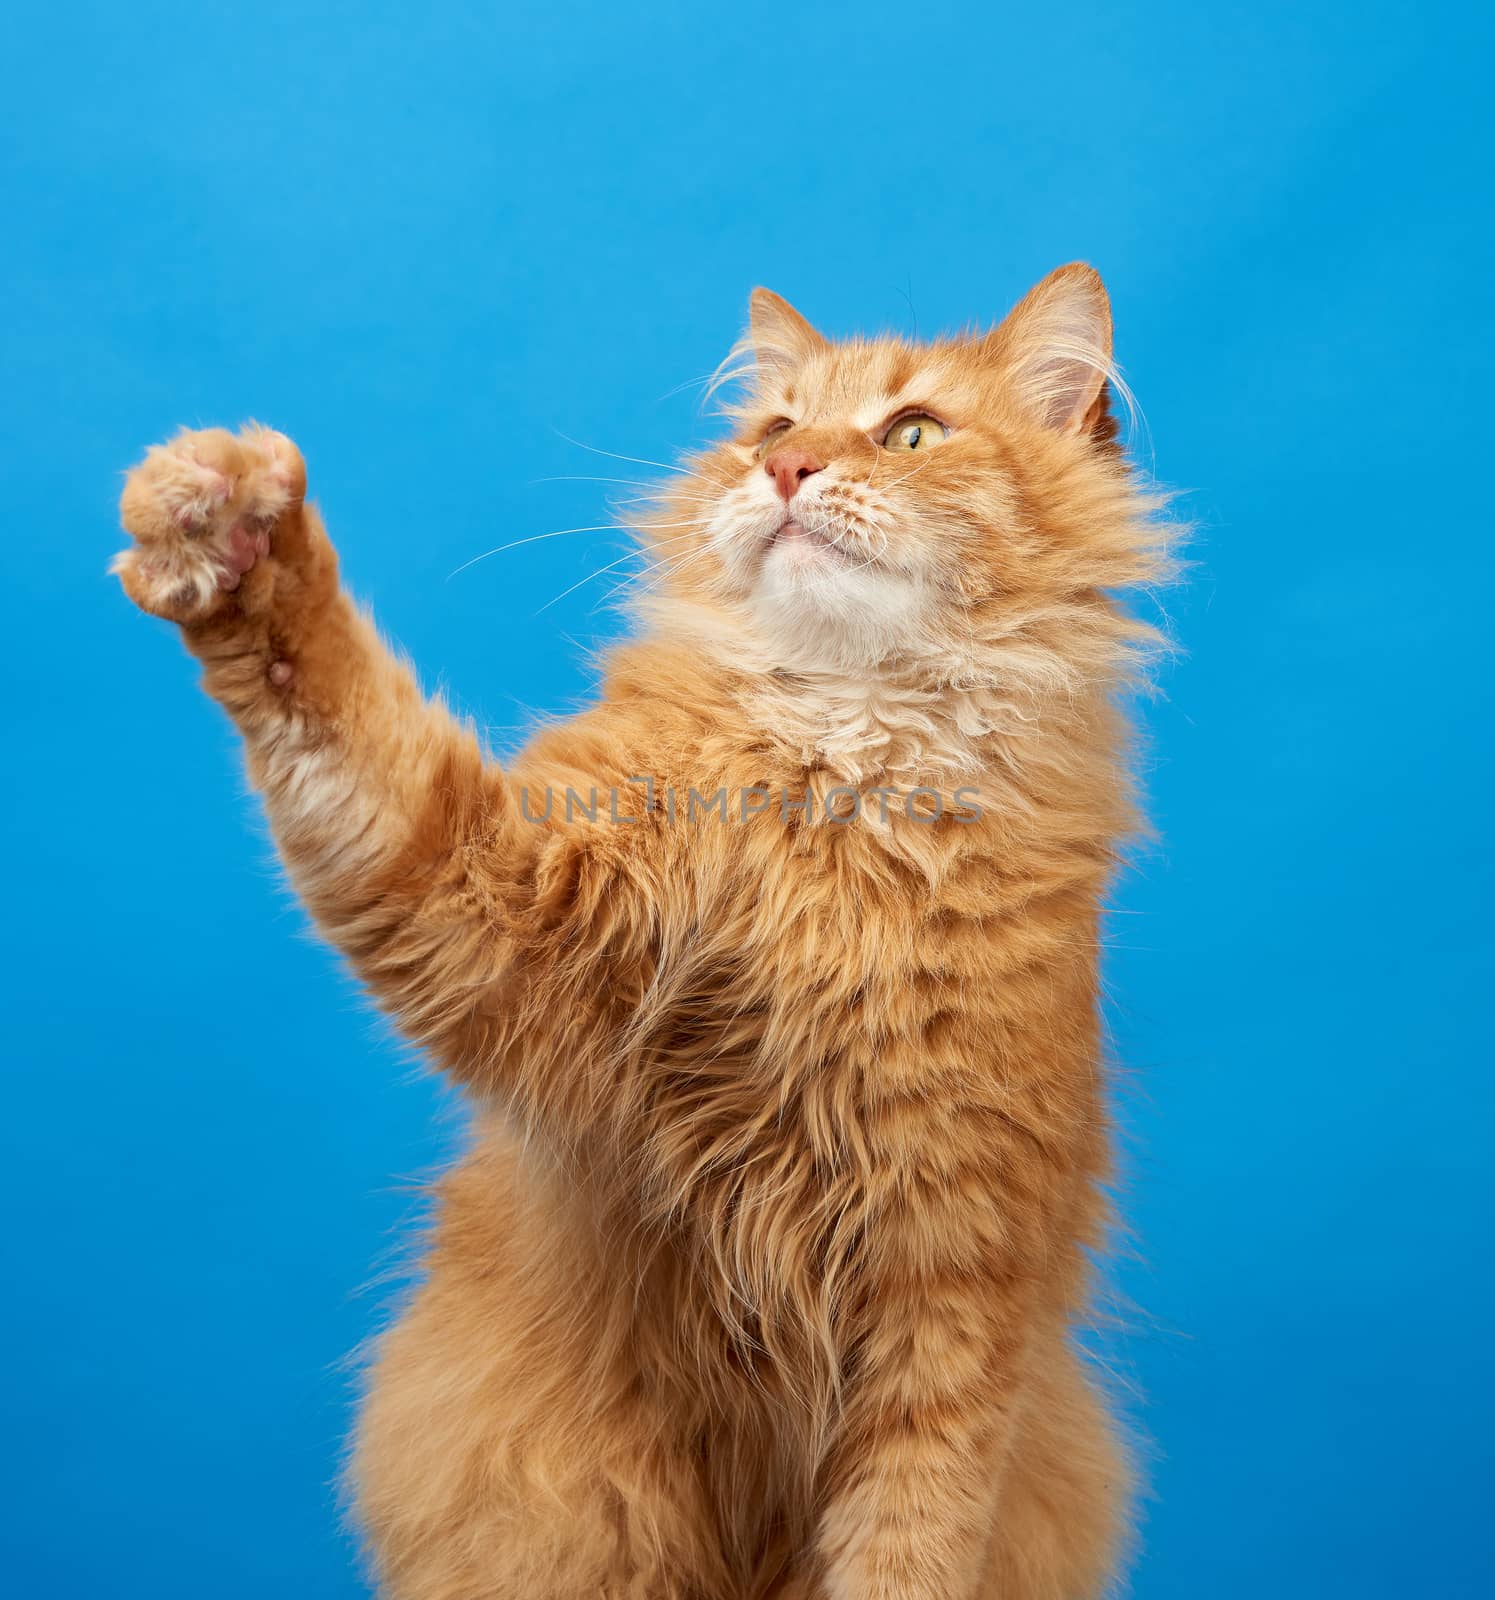 adult fluffy red cat sitting and raised its front paws up, imitation of holding any object, animal a blue background